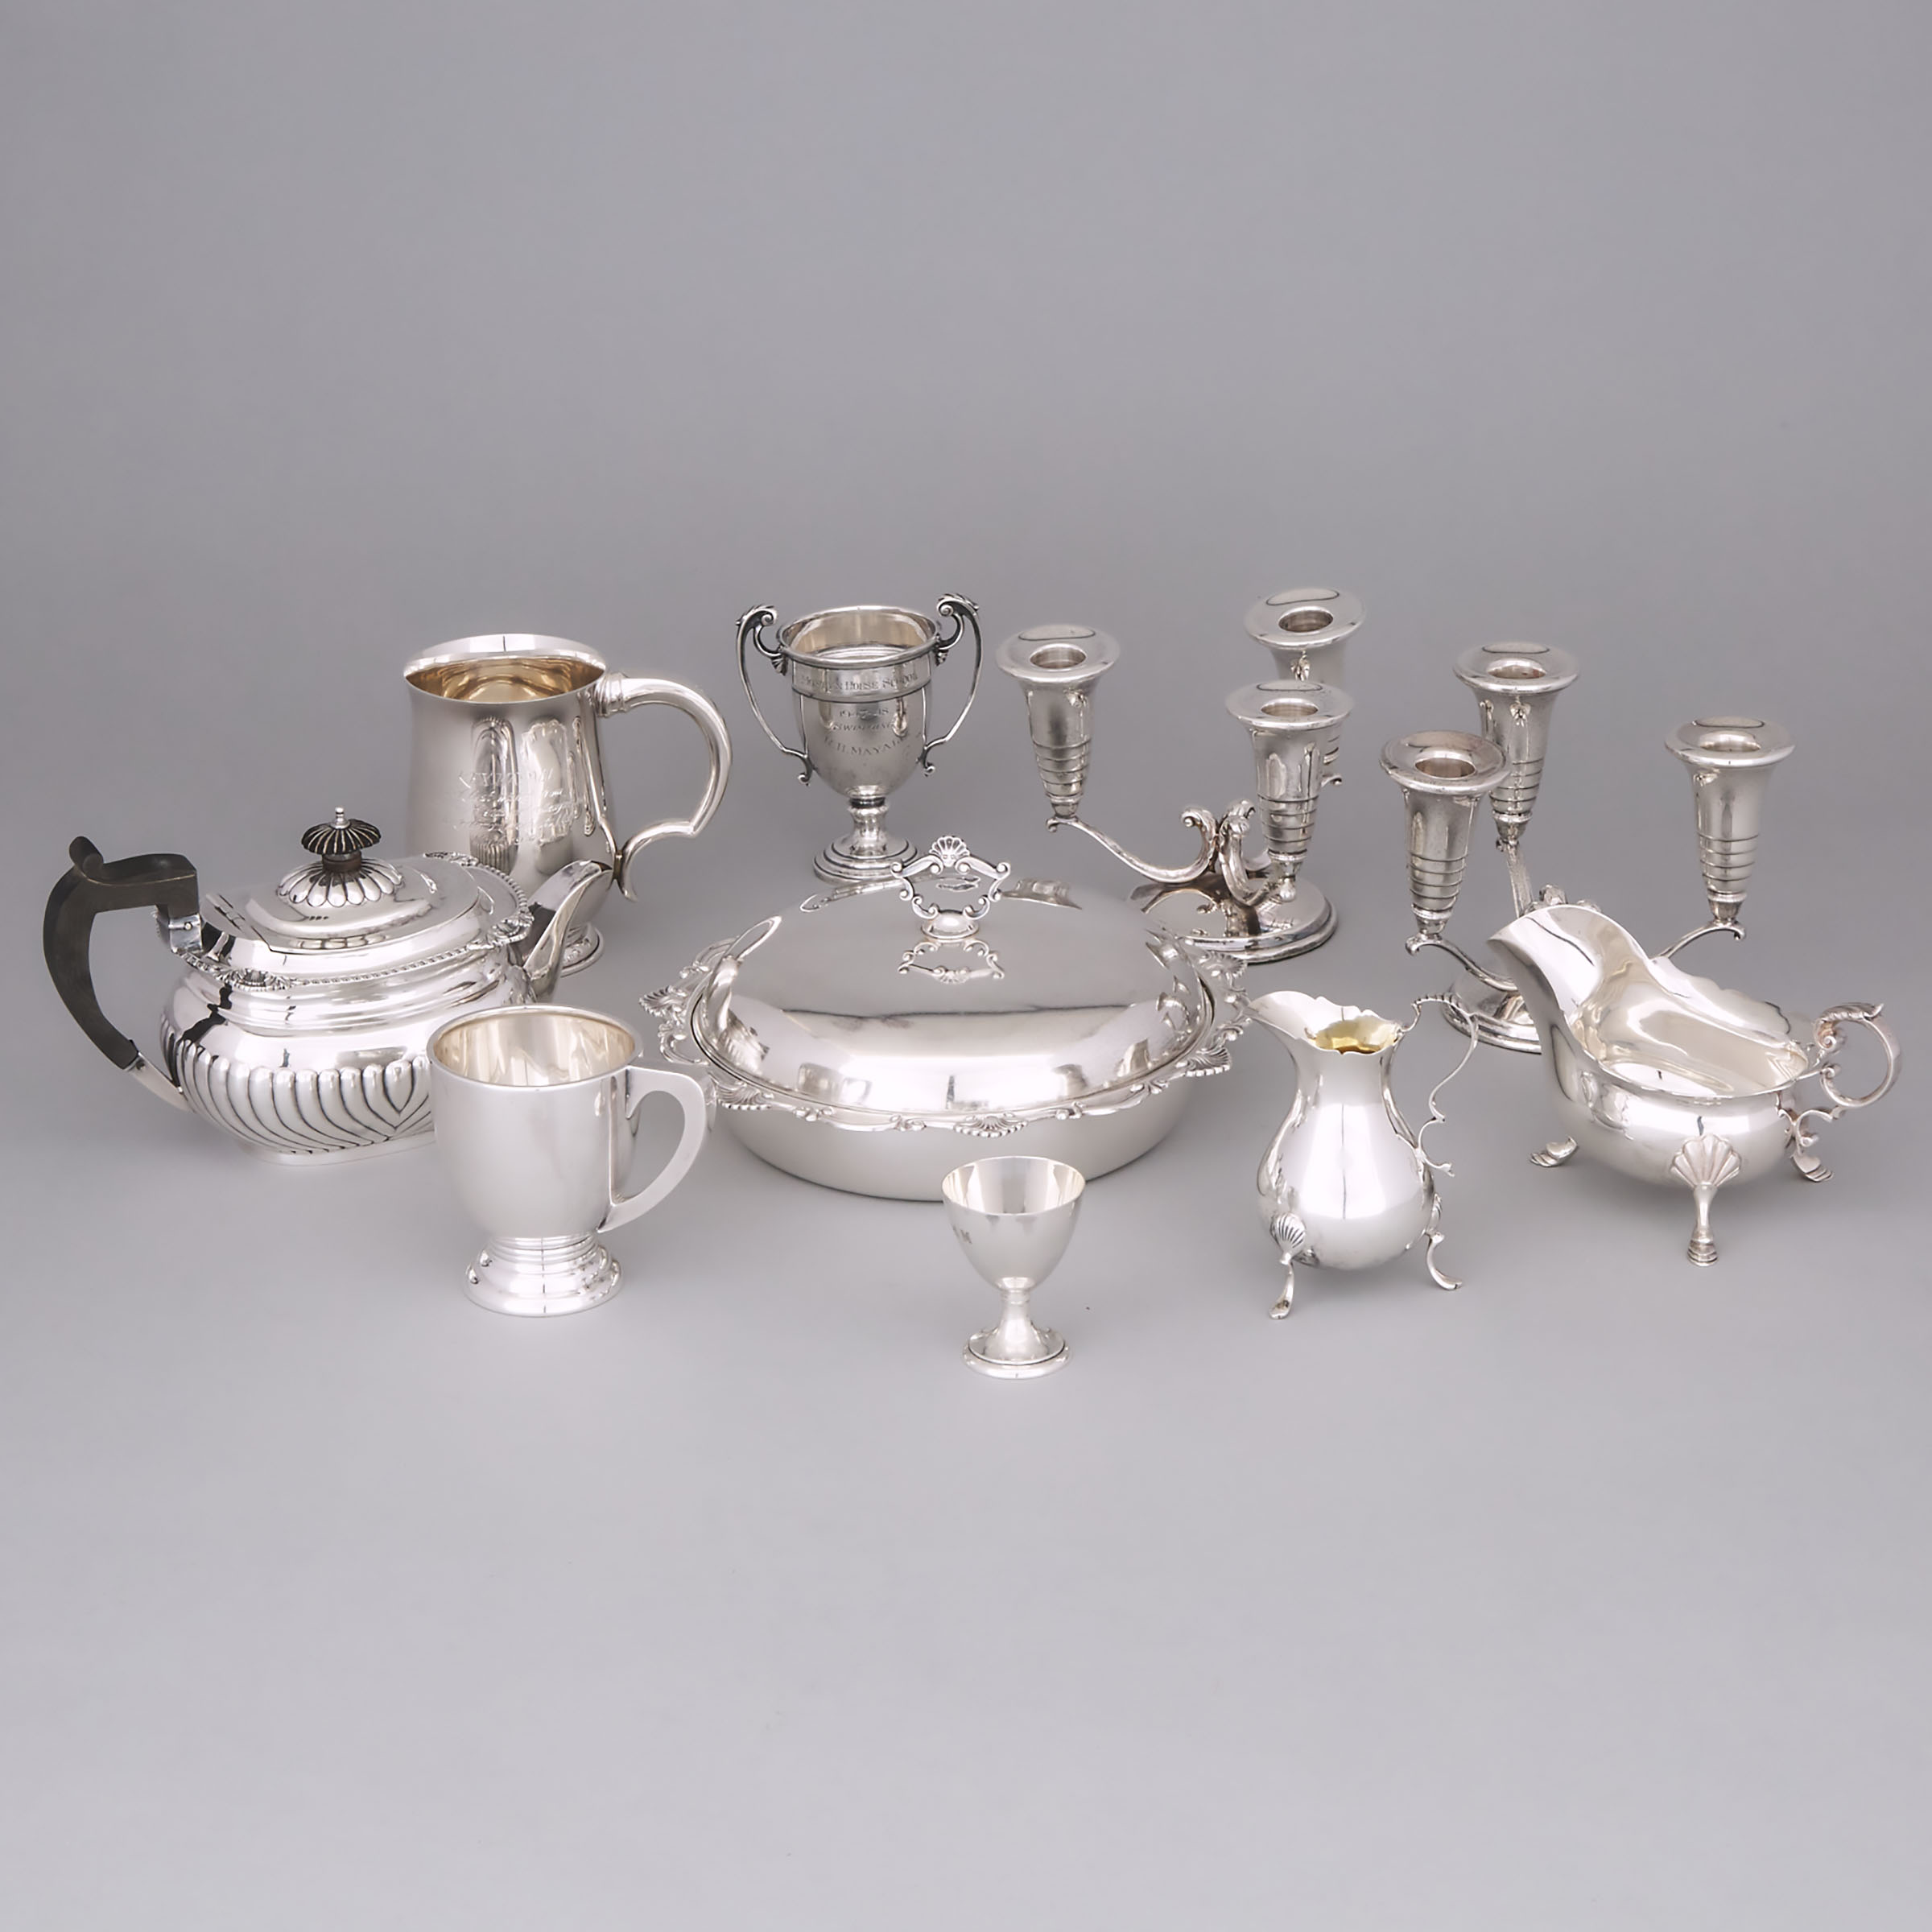 Group of English Silver, late 19th/20th century